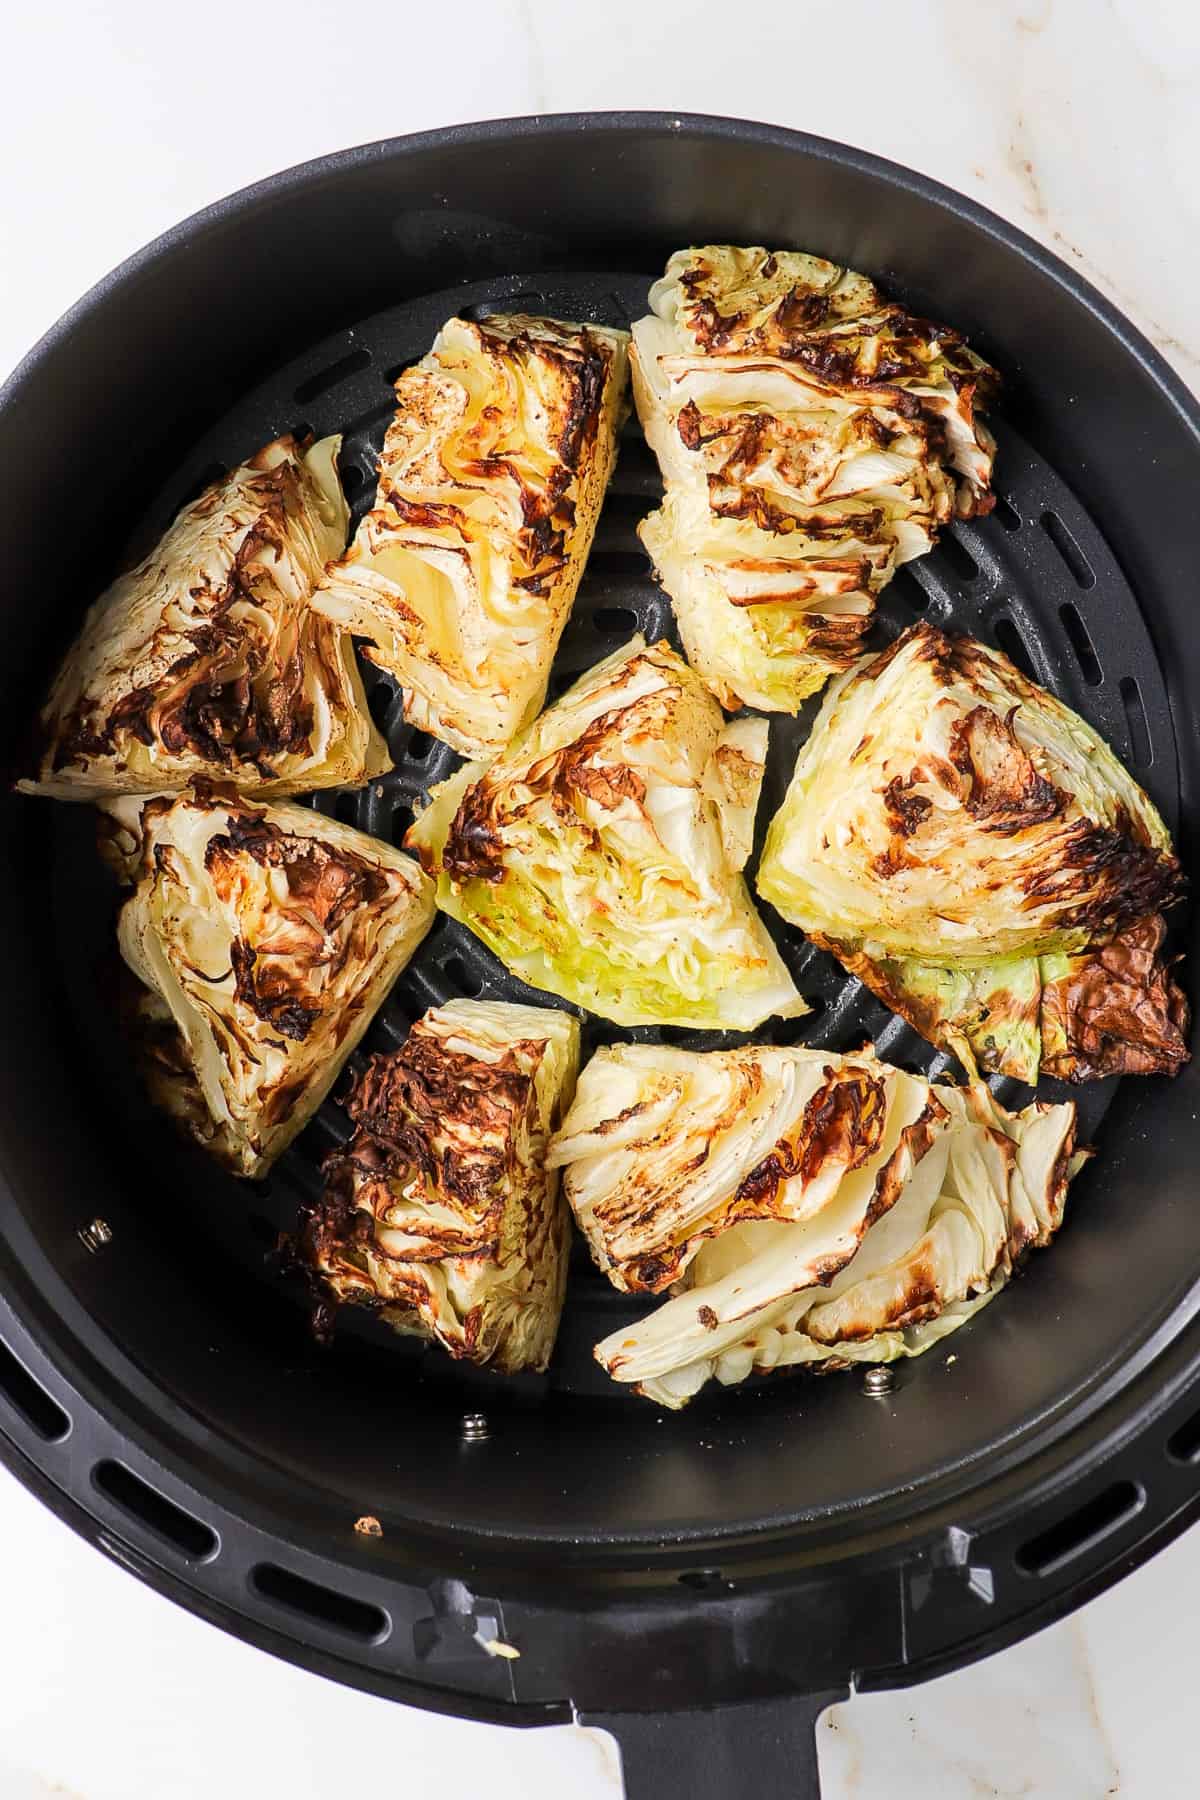 How Long To Cook Cabbage In Air Fryer